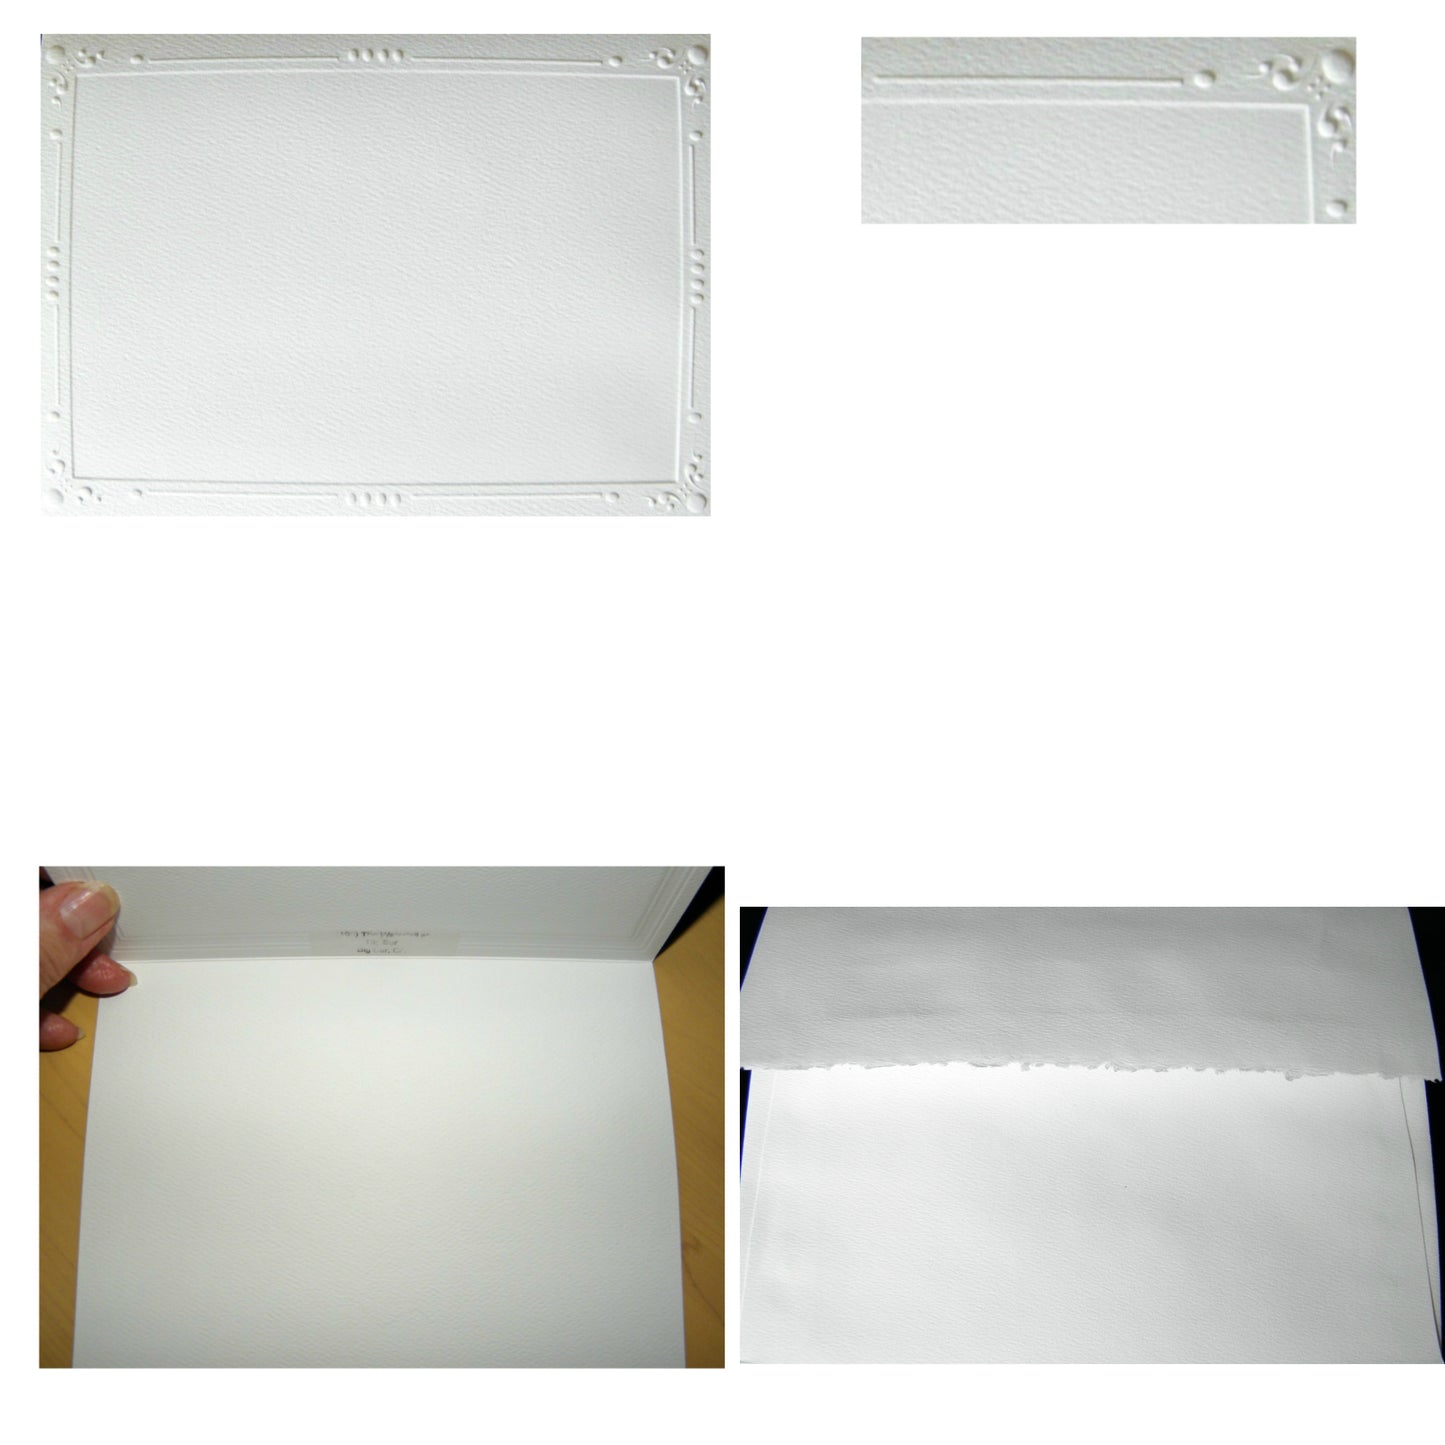 Photograph of our deluxe embossed Card Stock, the Blank inside, and the Decorative envelope